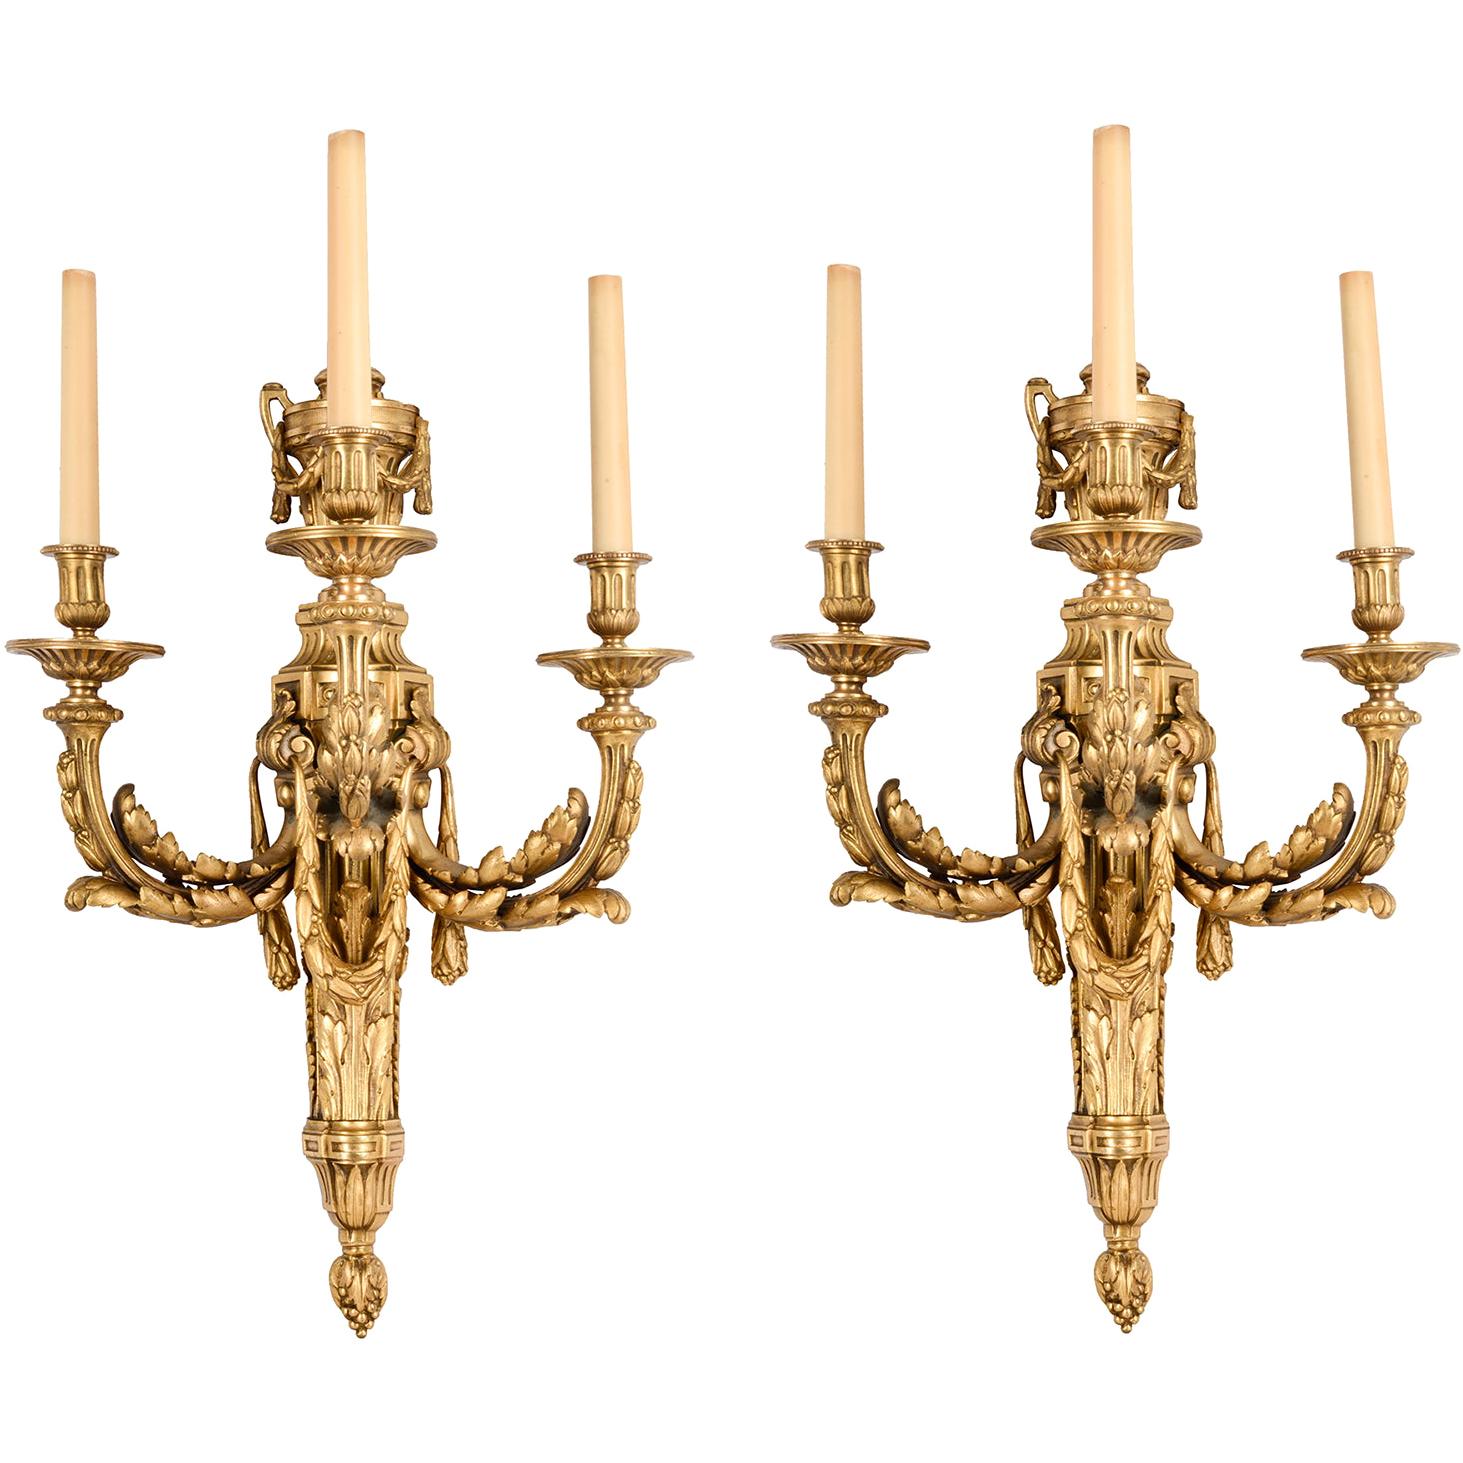 Pair of Classical 19th Century Louis XVI Style Ormolu Wall Lights For Sale